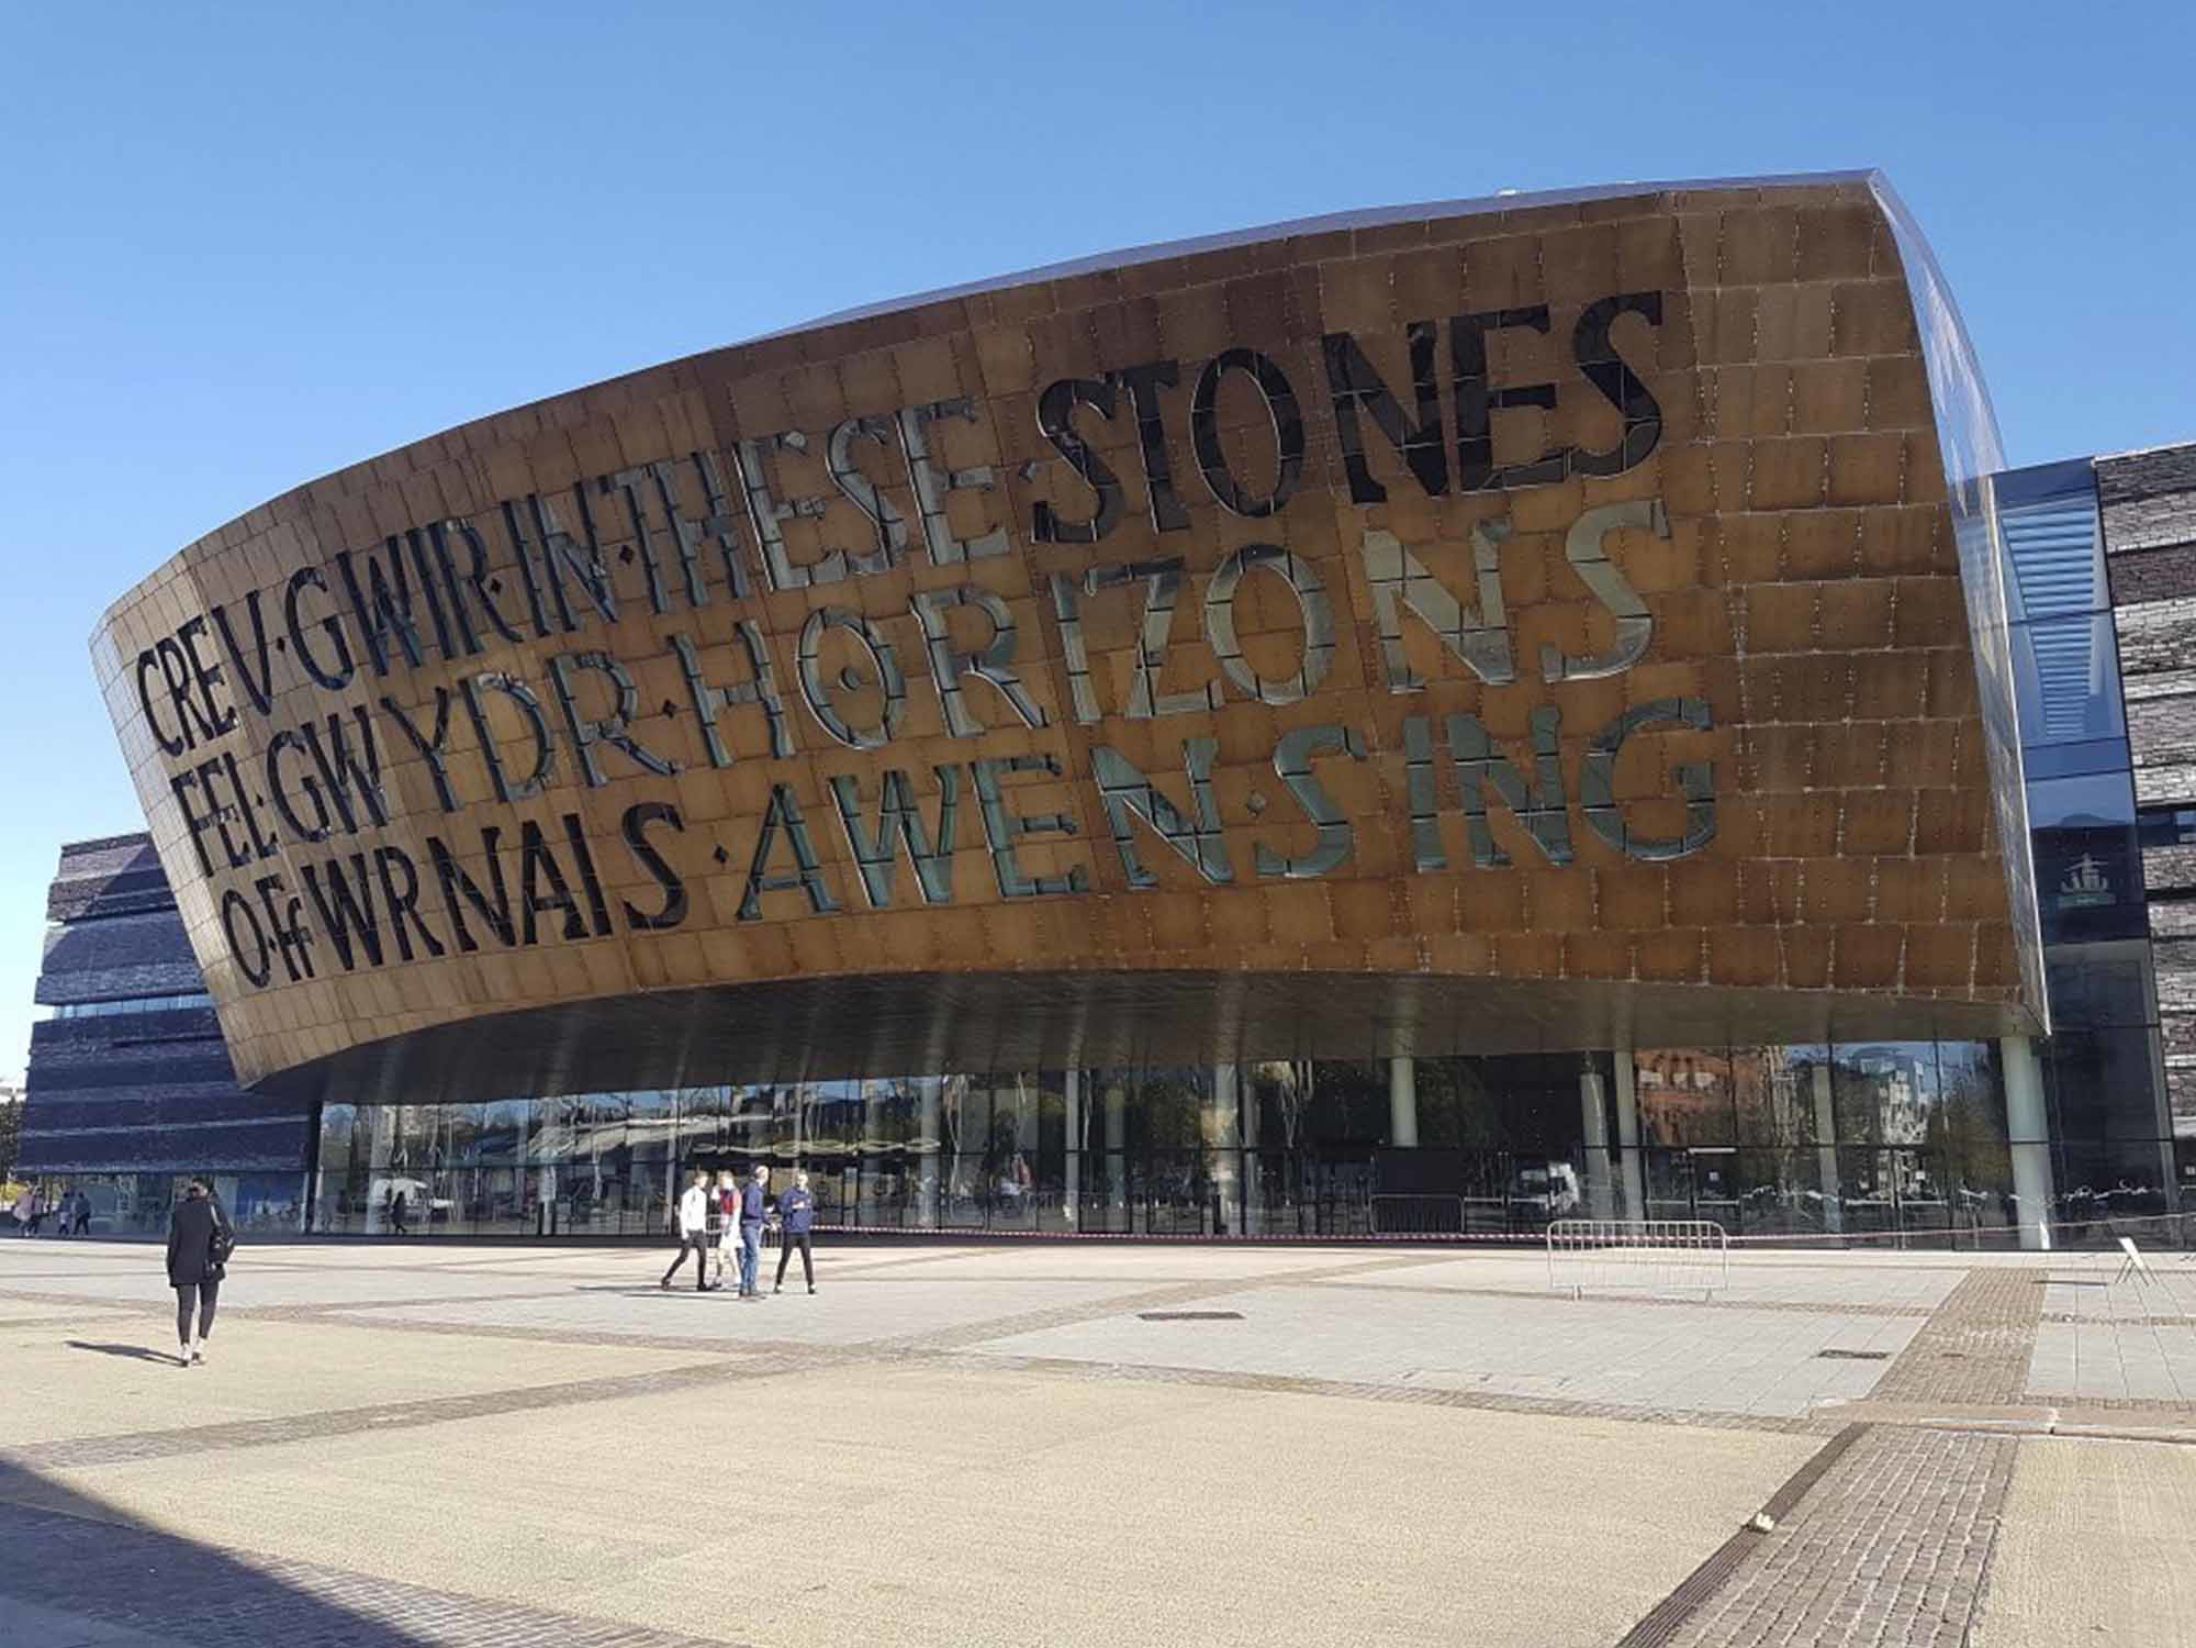 Things to do in Cardiff - Wales Millennium Centre